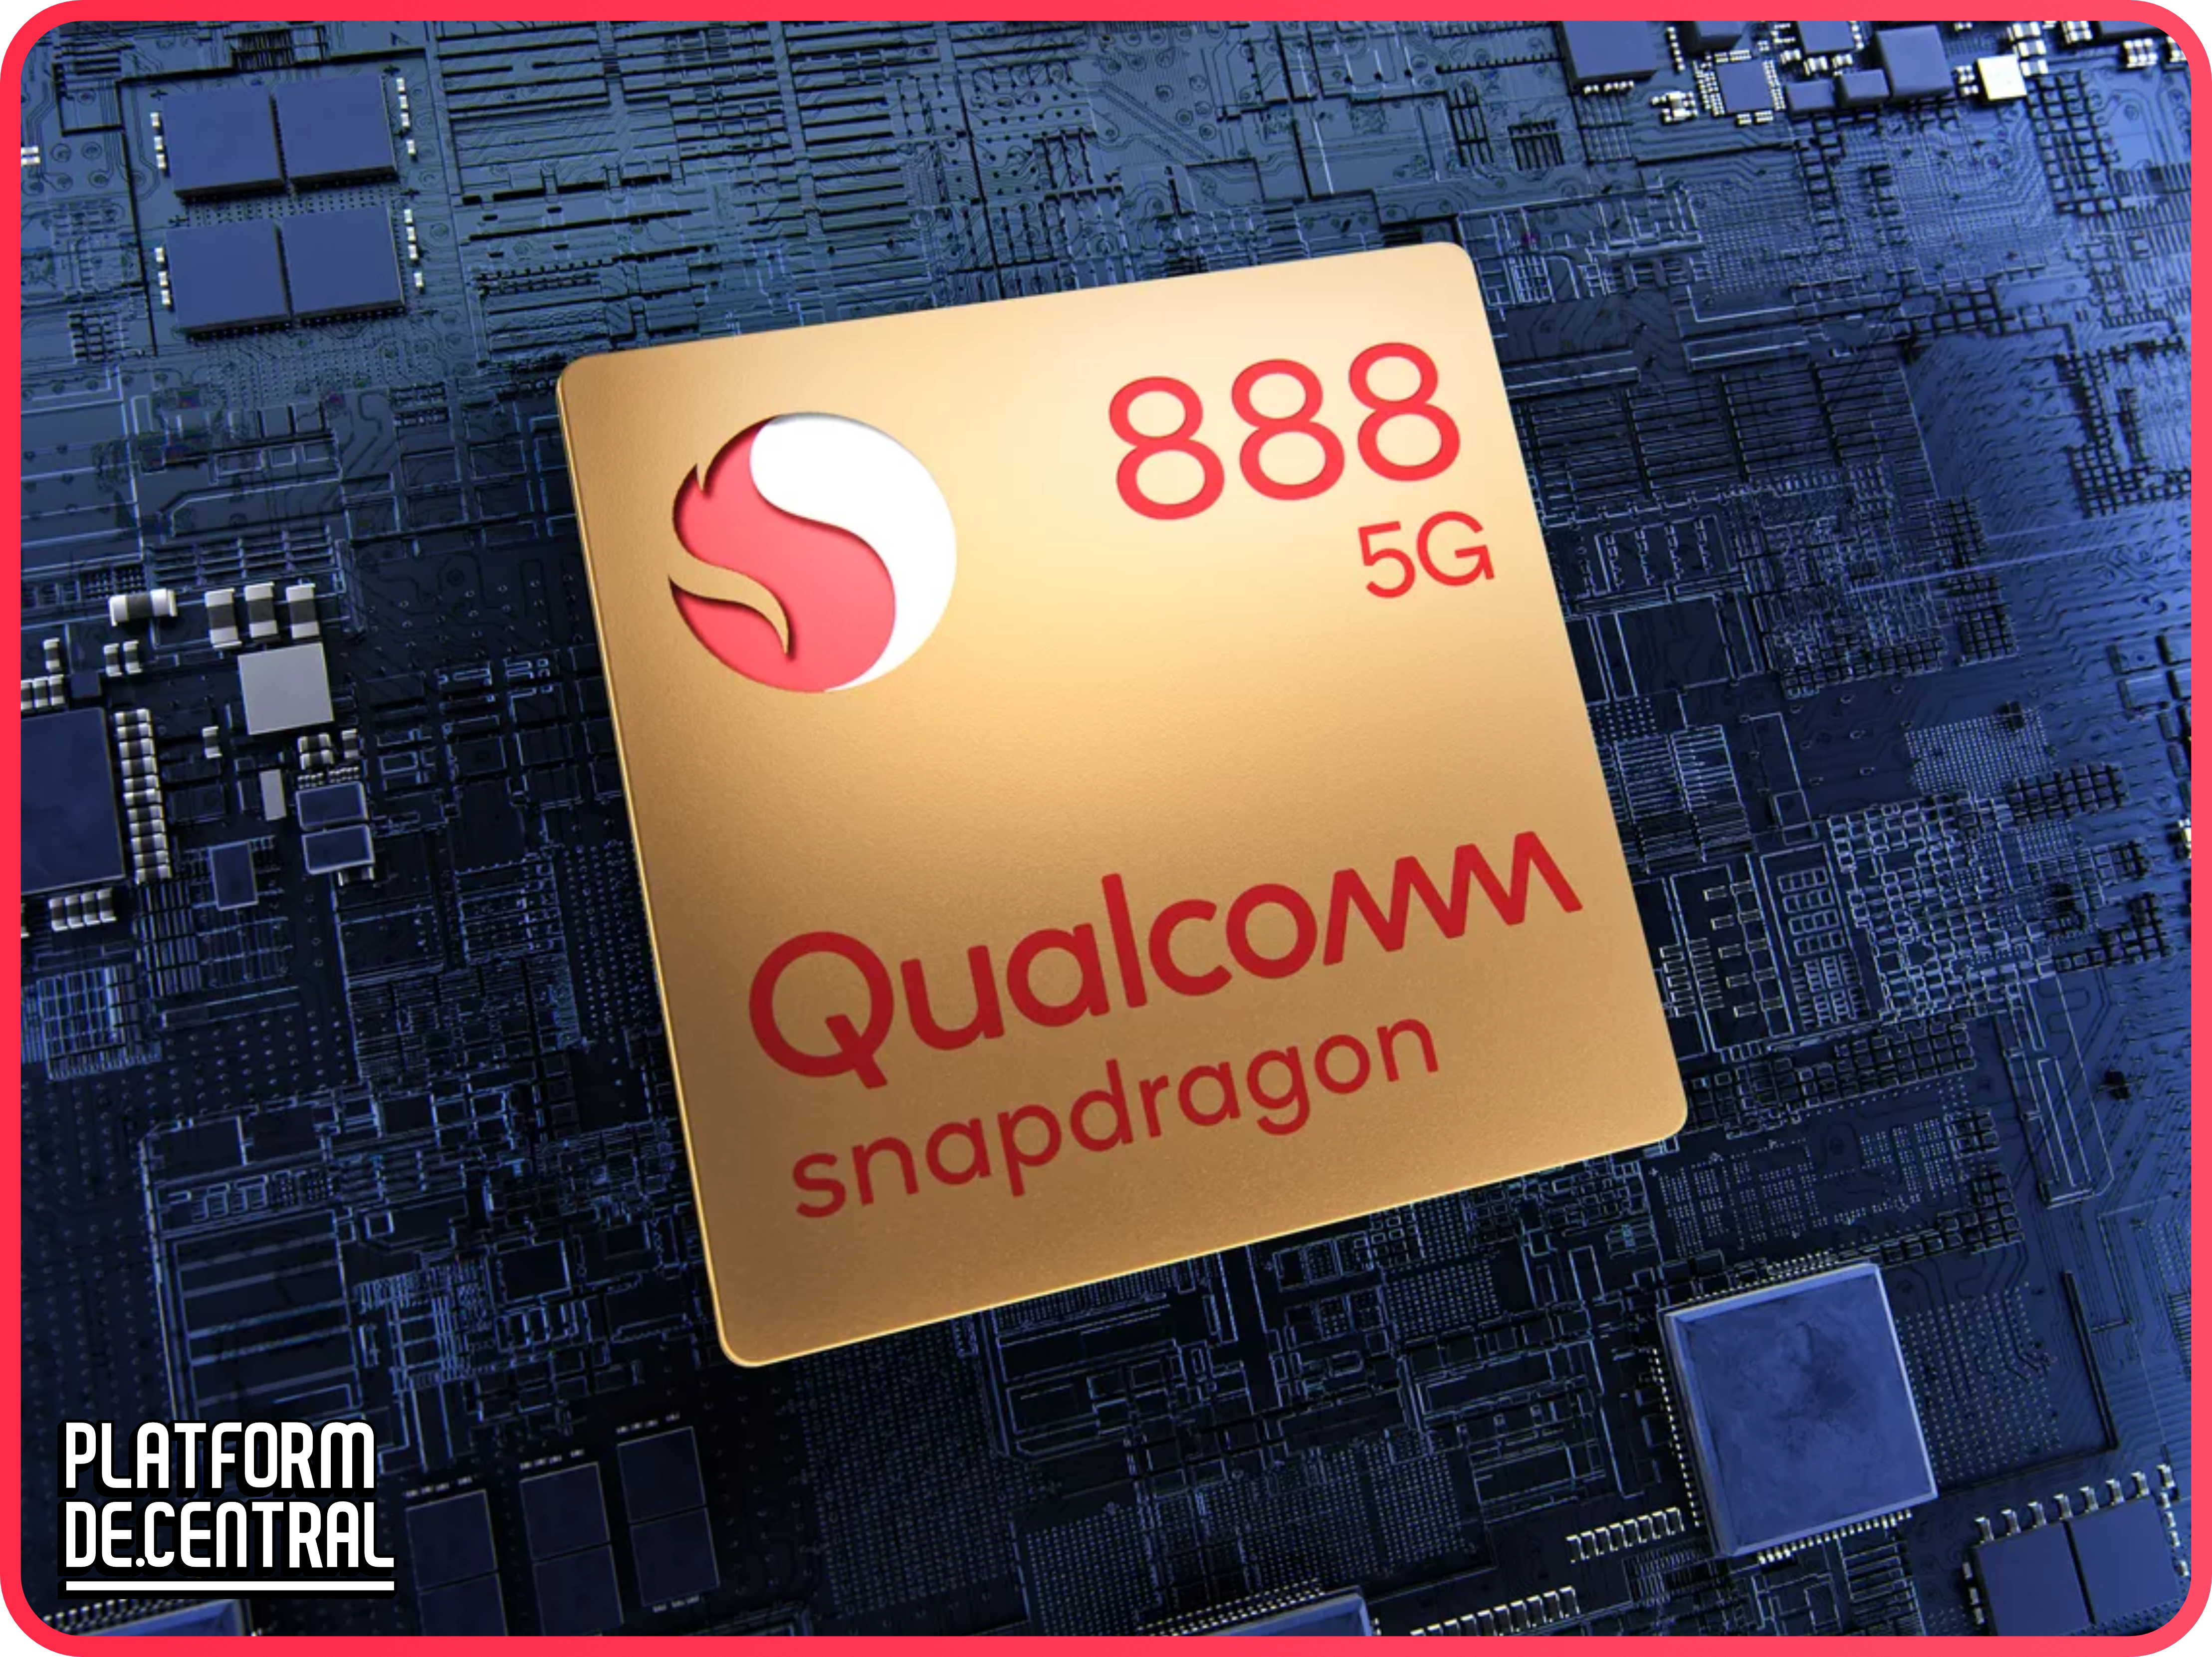 ARMs Race | Qualcomm Snapdragon 888 is faster, with more powerful AI and better cameras